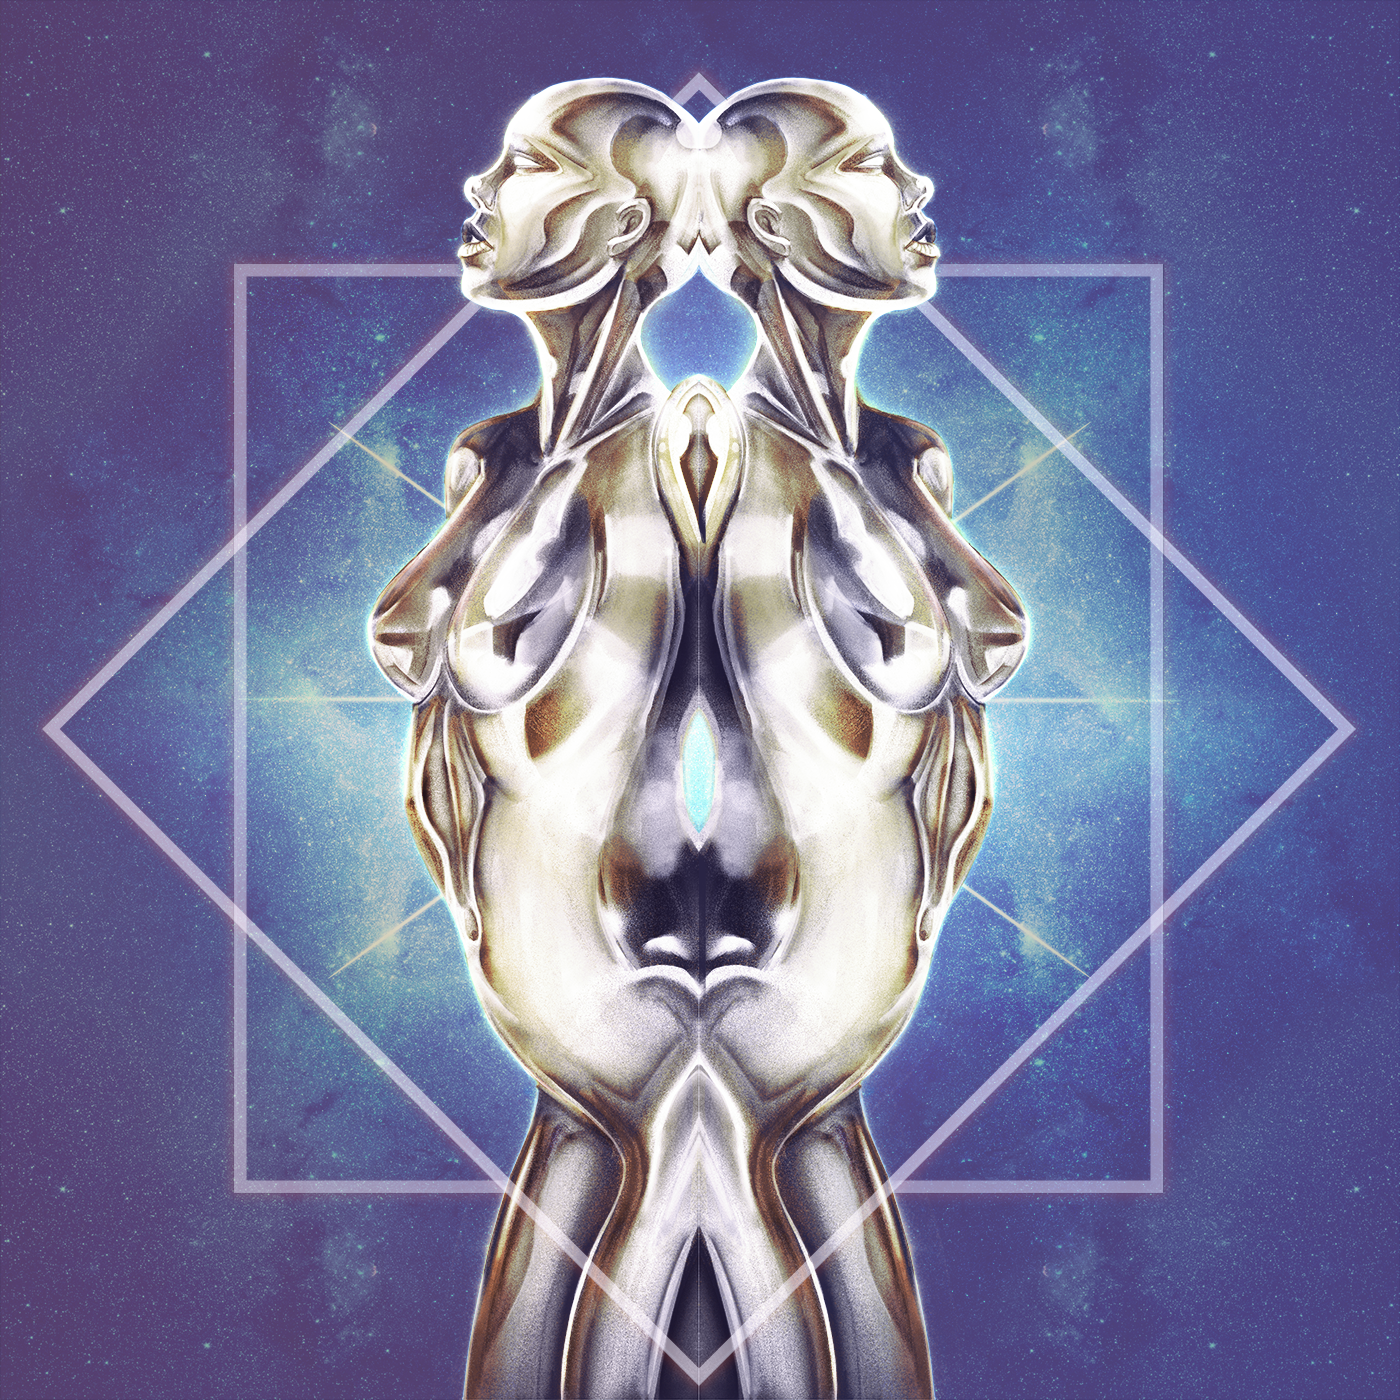 chrome woman 80s trippy psychedellic album cover Cover Art sexy Cyborg female form